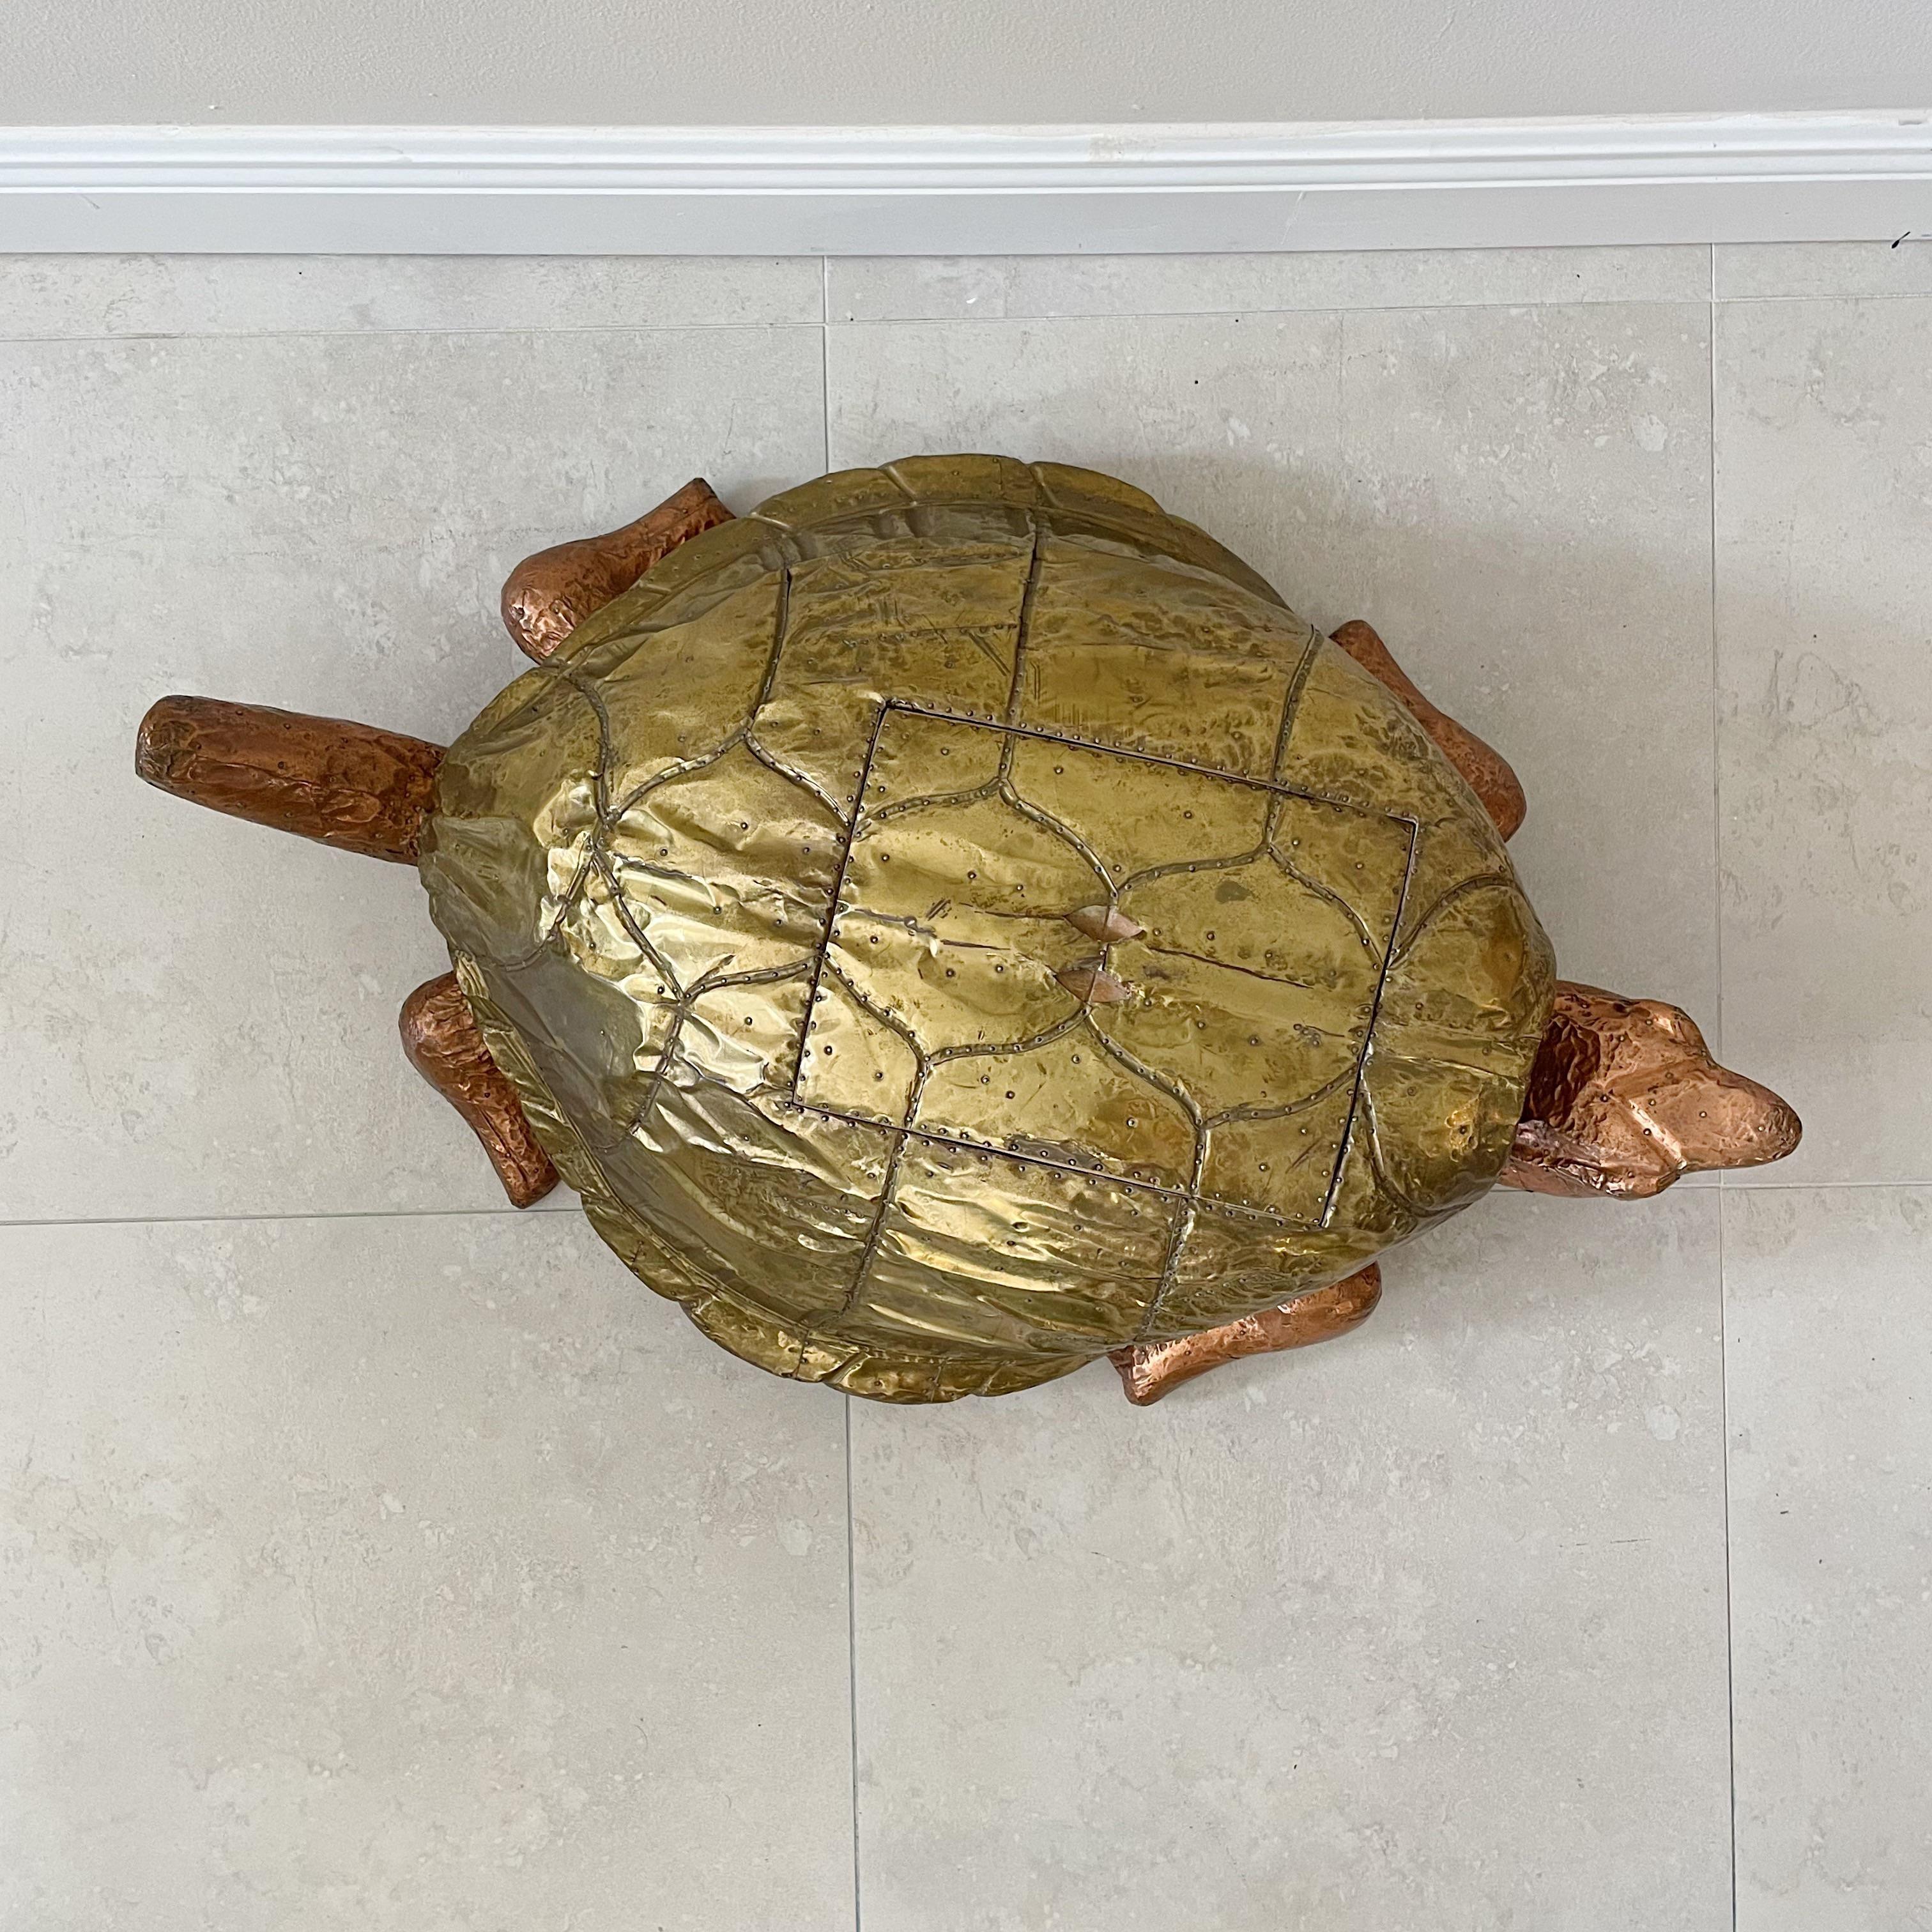 Super rare Turtle box in brass and copper by Arthur Court, 1980's. Wood turtle clad in copper with the shell clad in brass, with lid on its back. Measures 33